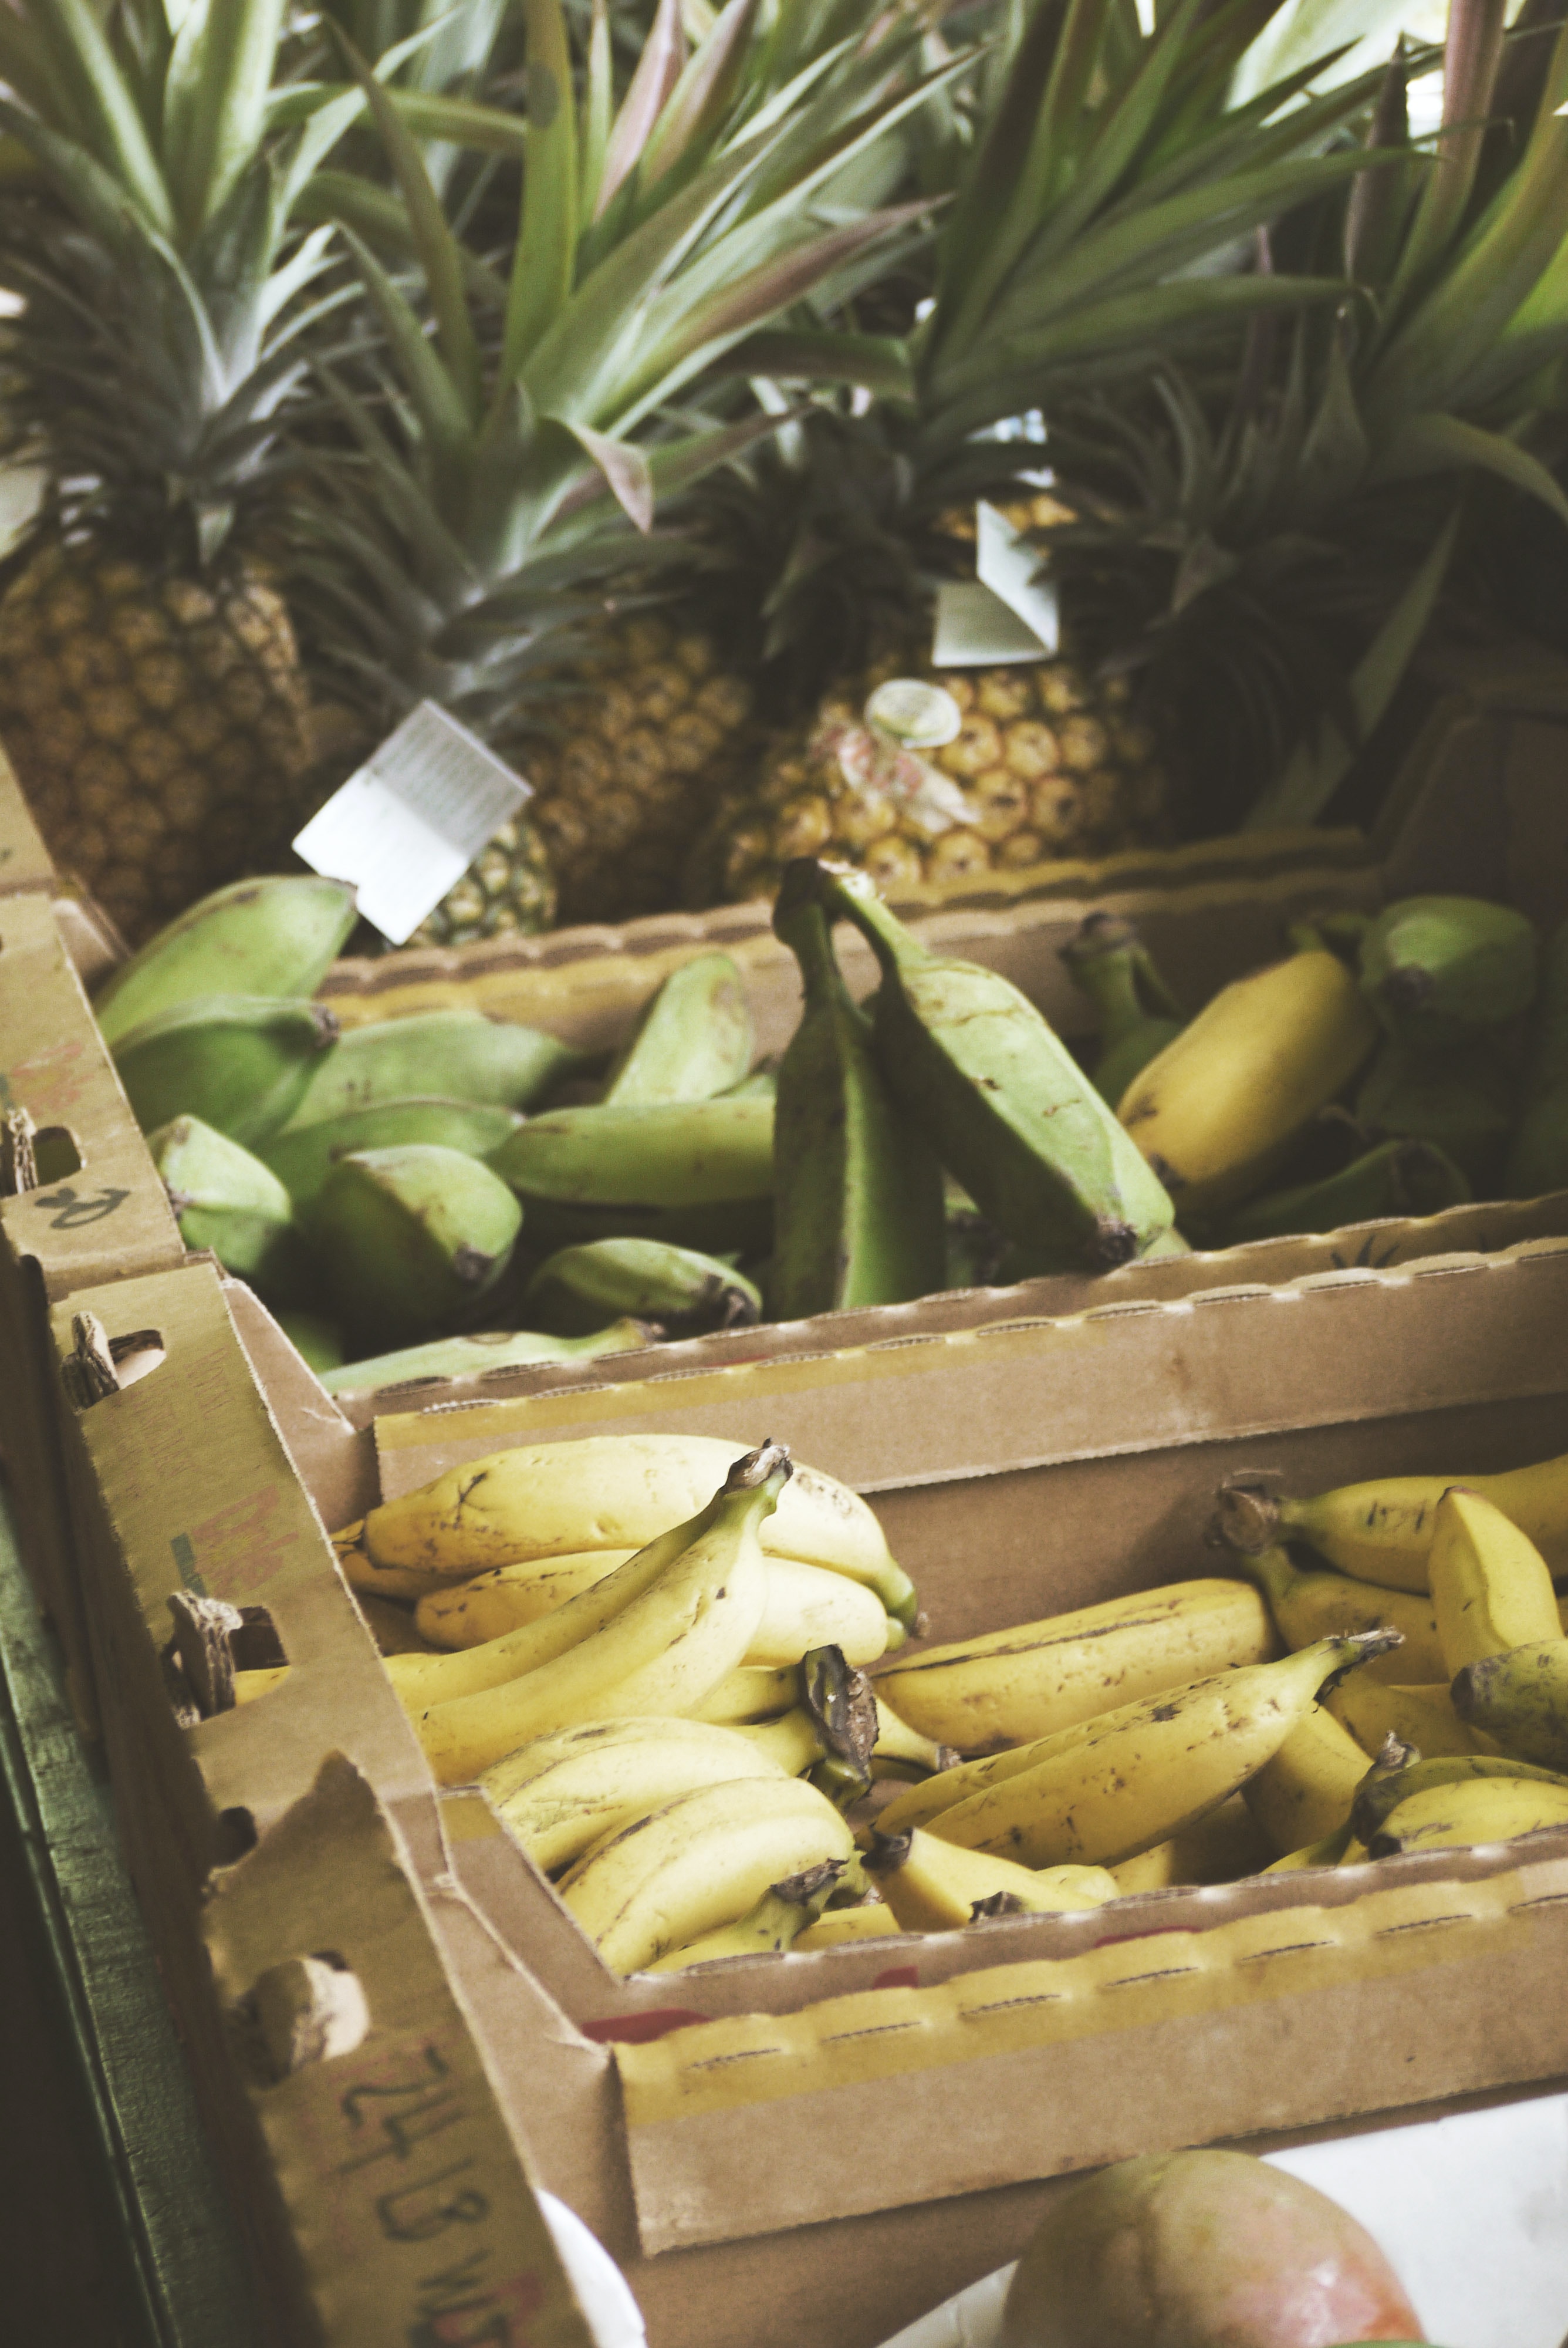 Why More Produce Shippers are Opting to Reuse Packaging